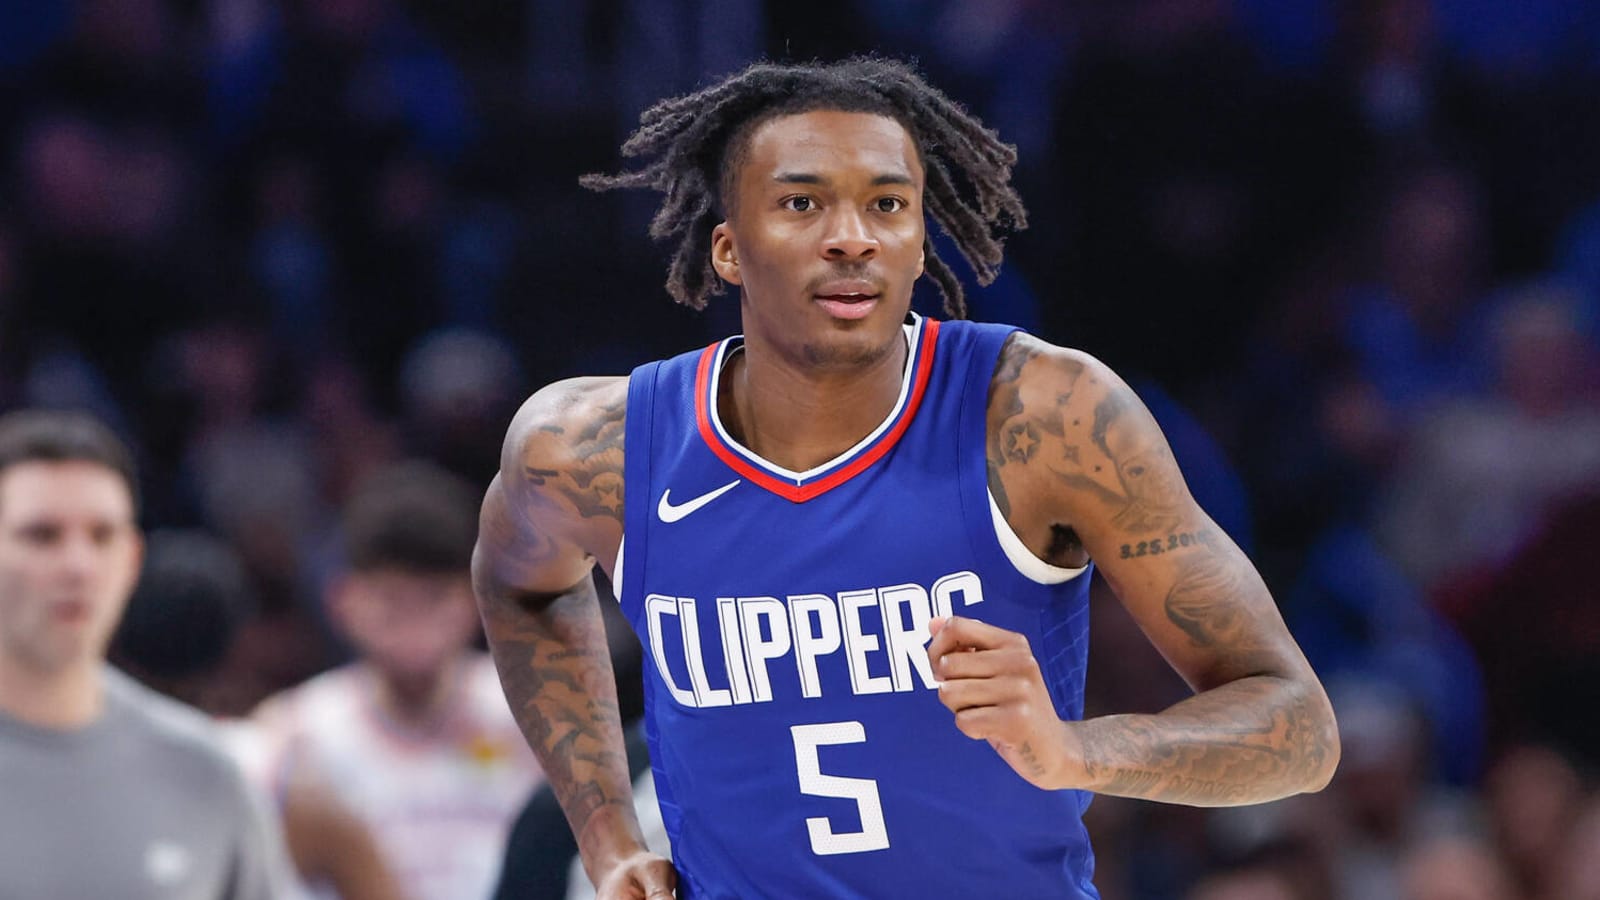 Clippers reportedly gauging trade market for one young player